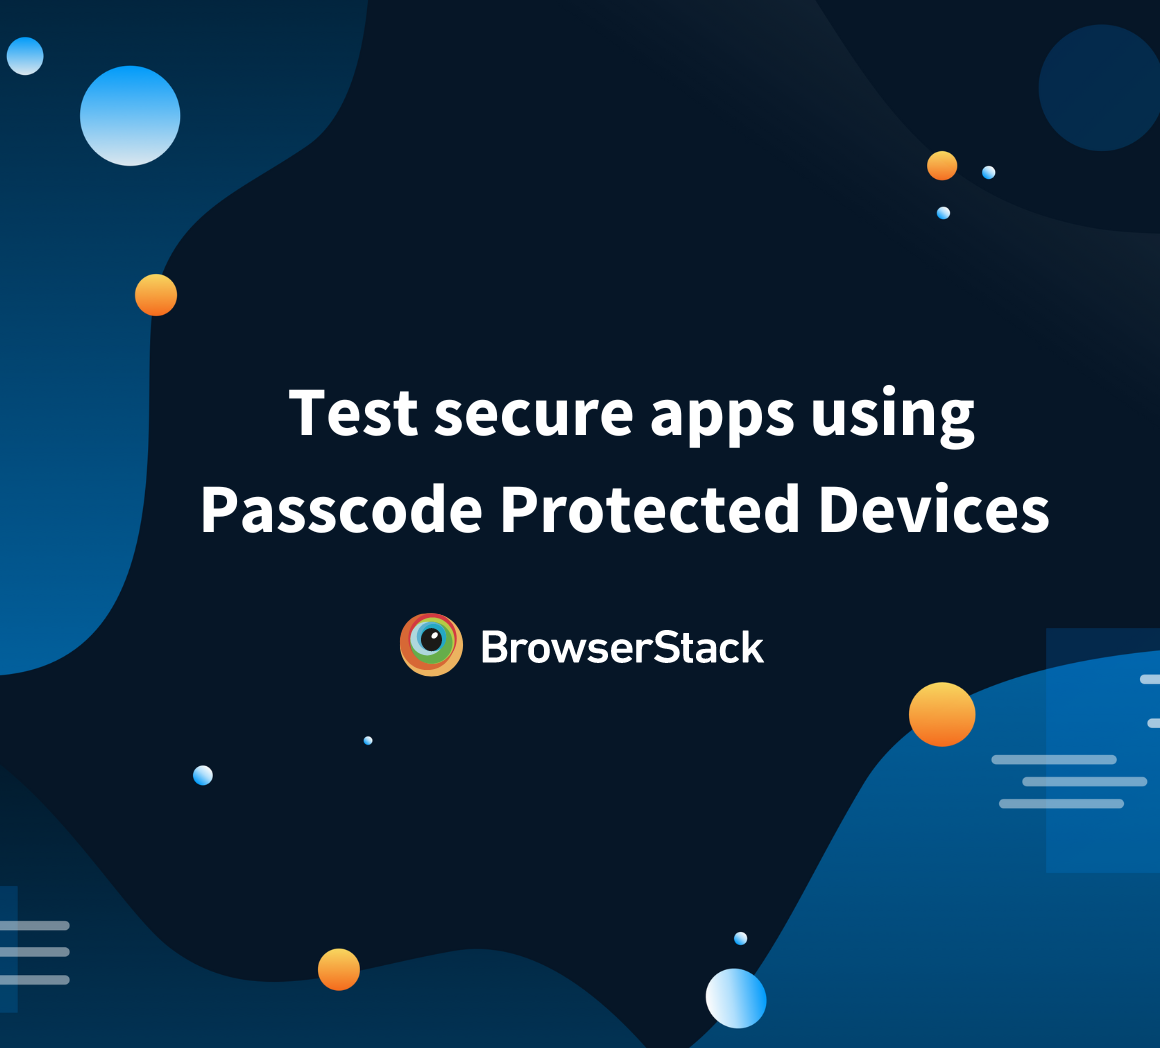 Test secure apps using Passcode Protected Devices